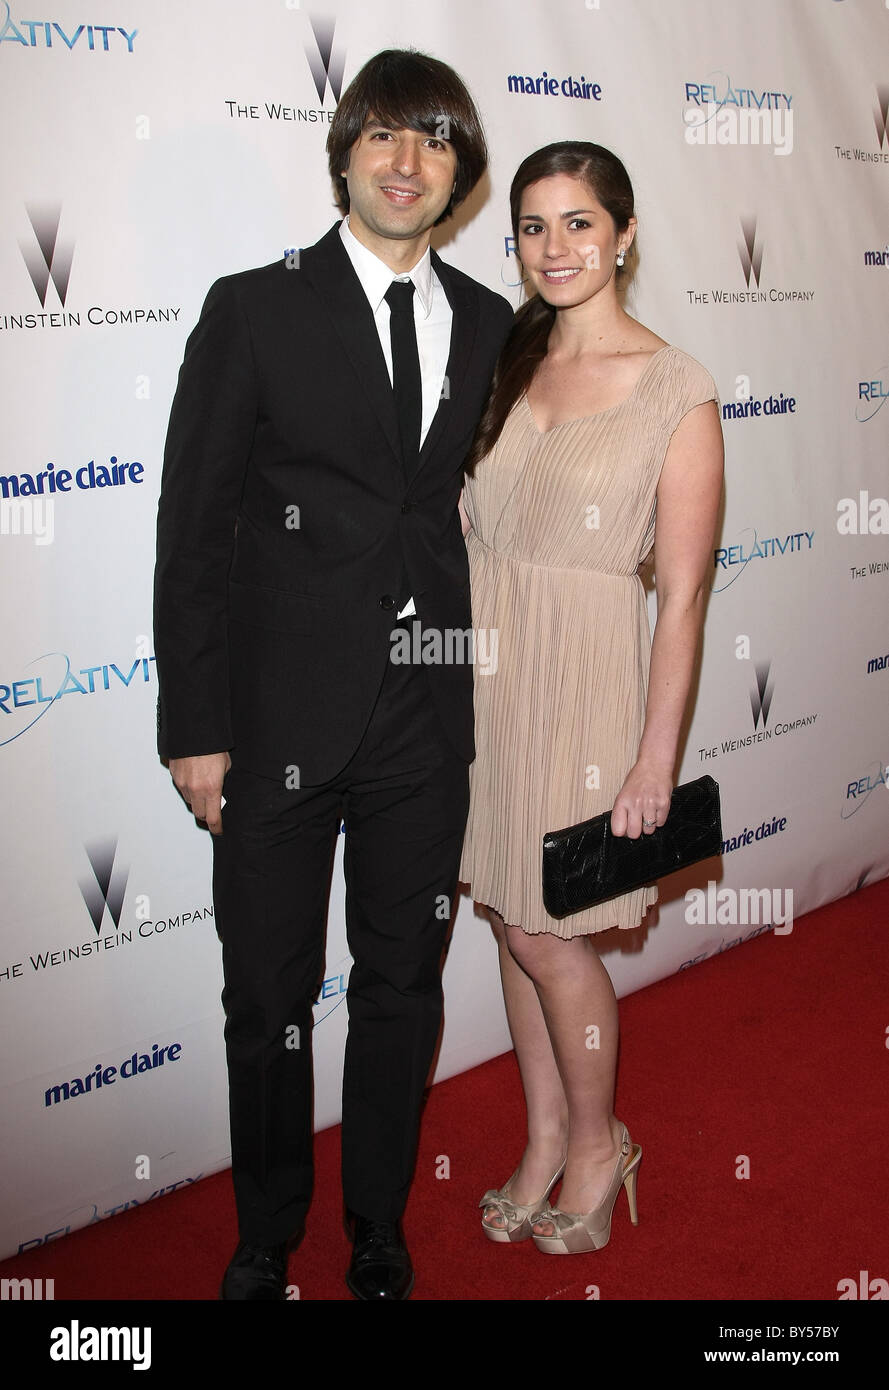 DEMETRI MARTIN RELATIVITY MEDIA AND THE WEINSTEIN COMPANY 2011 GOLDEN GLOBES AFTER PARTY BEVERLY HILLS LOS ANGELES CALIFORNIA Stock Photo